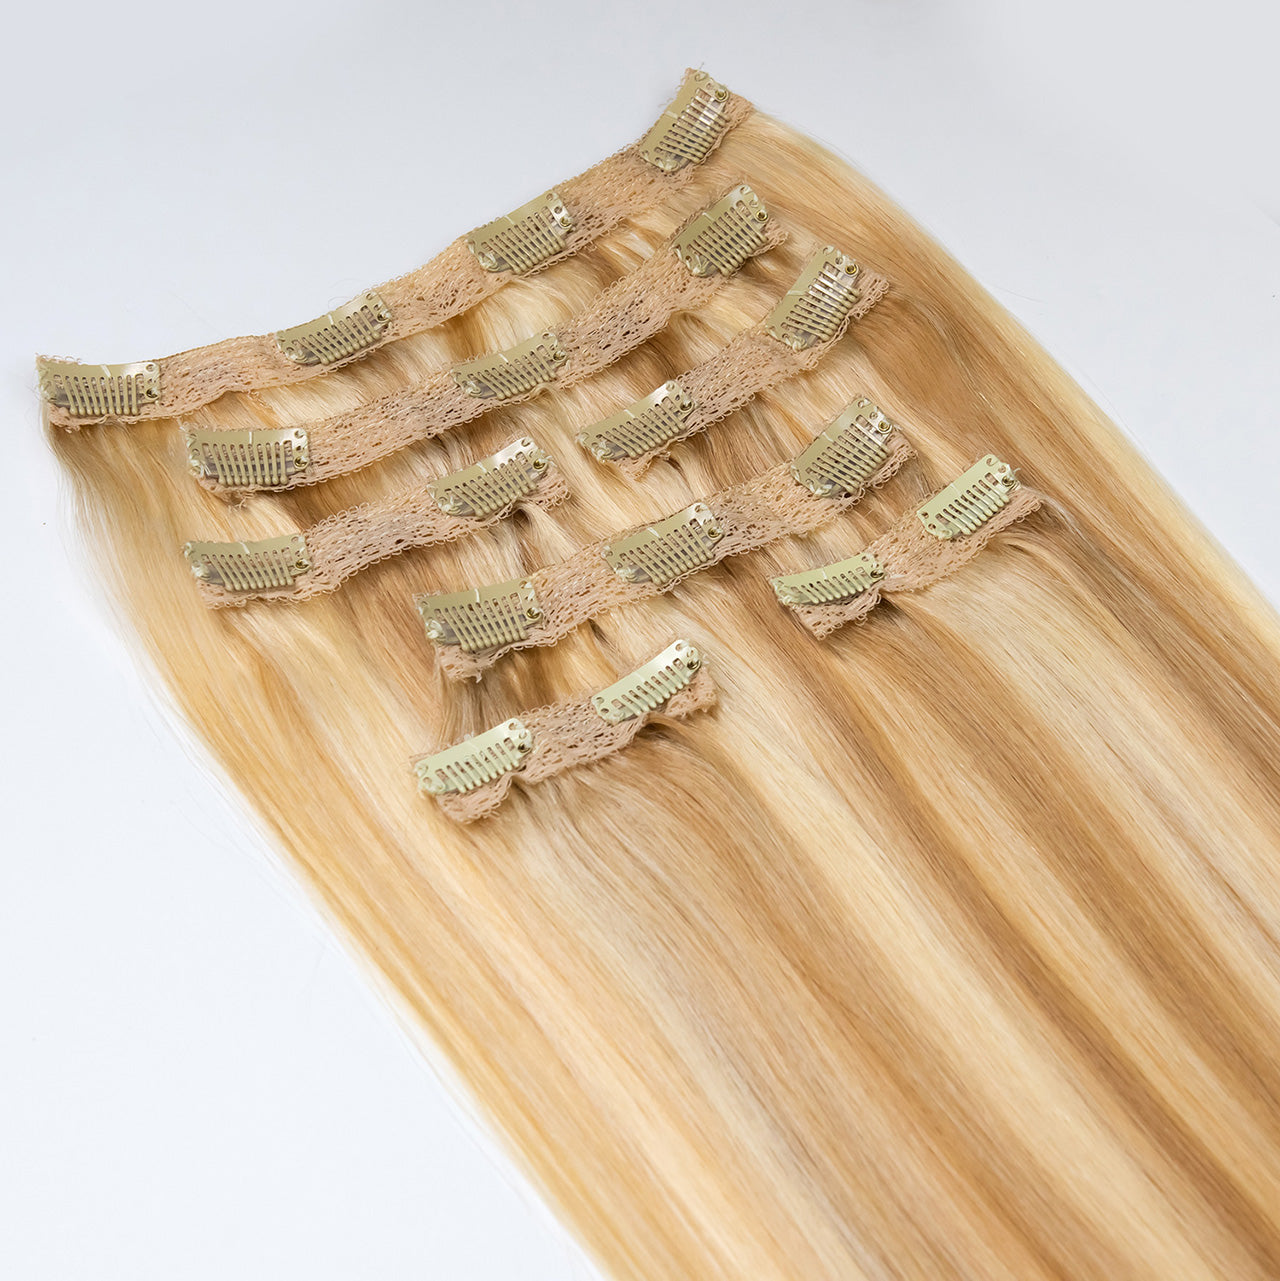 AVERA #27/613 Mix Blonde Balayage Clip-In Hair Extension